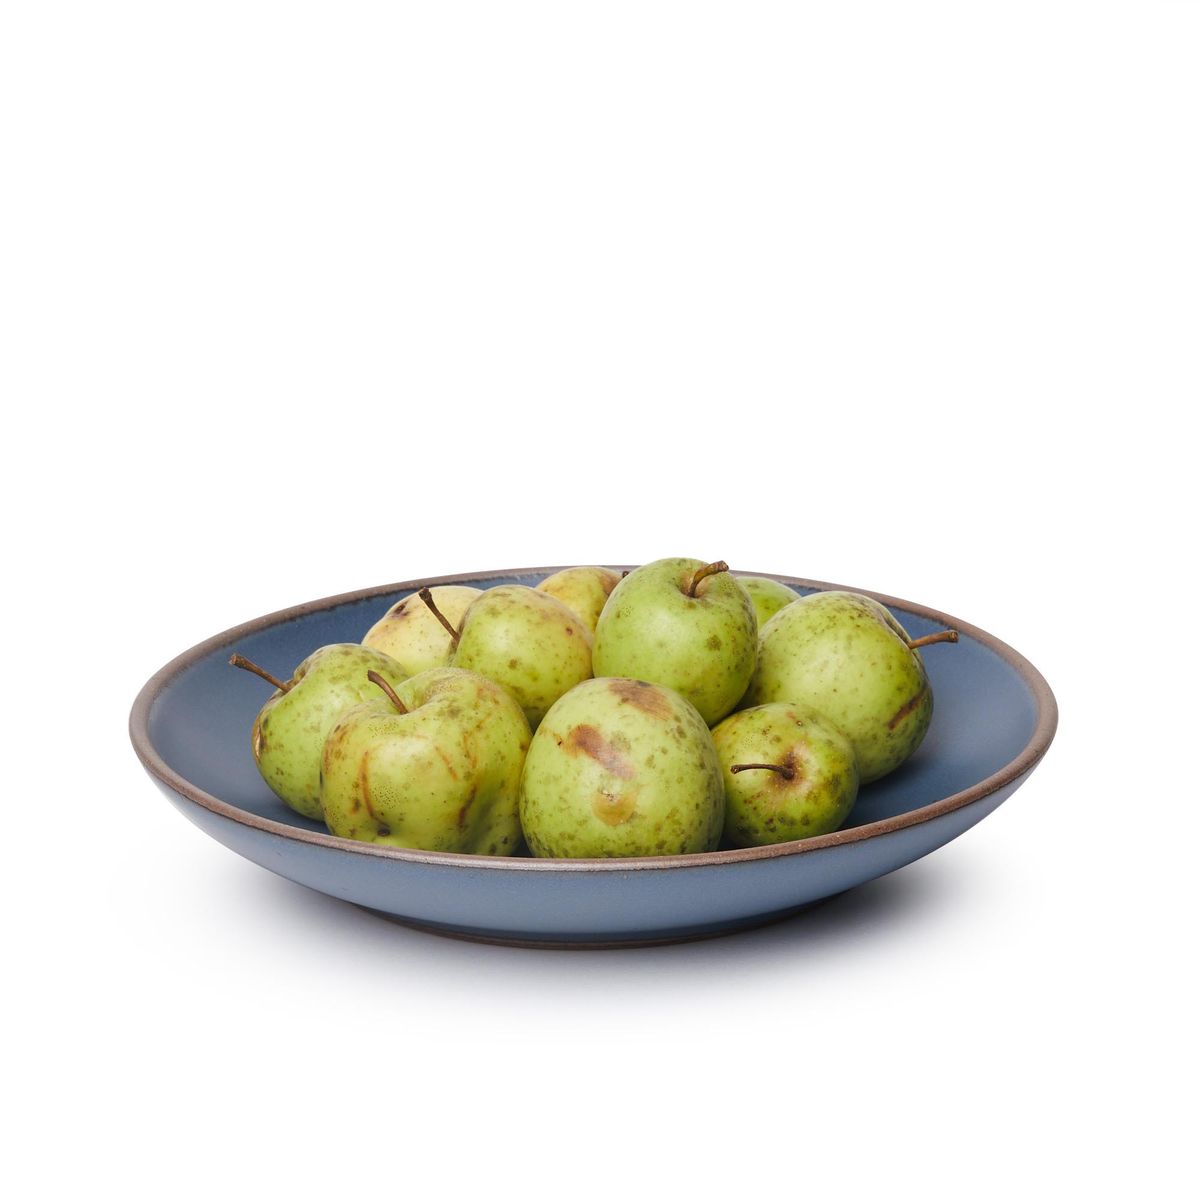 Pears on a large ceramic plate with a curved bowl edge in a toned-down navy color featuring iron speckles and an unglazed rim.